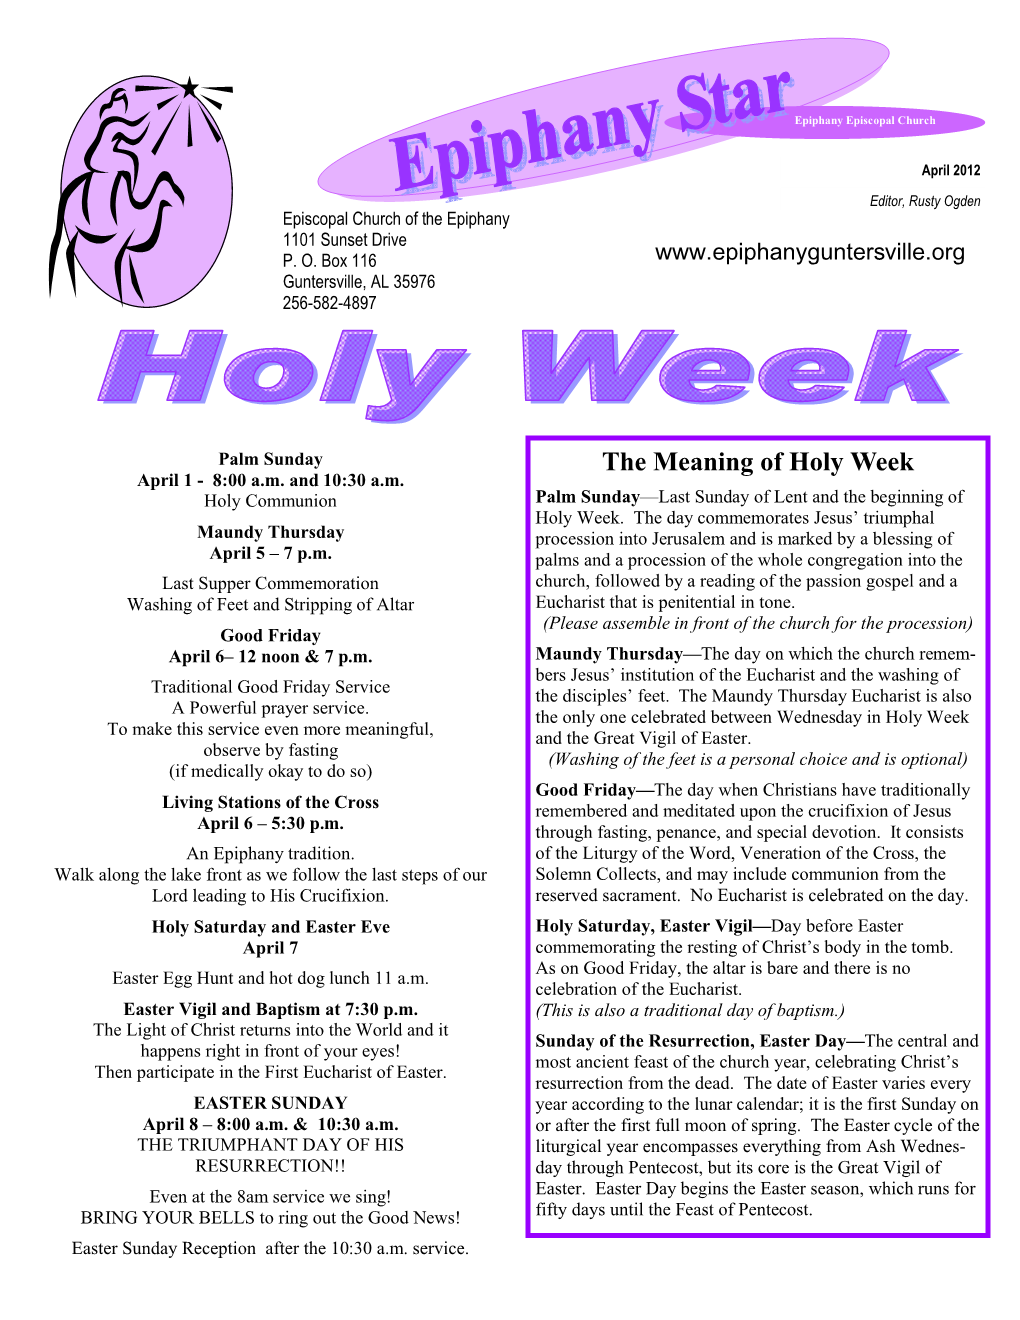 The Meaning of Holy Week April 1 - 8:00 A.M